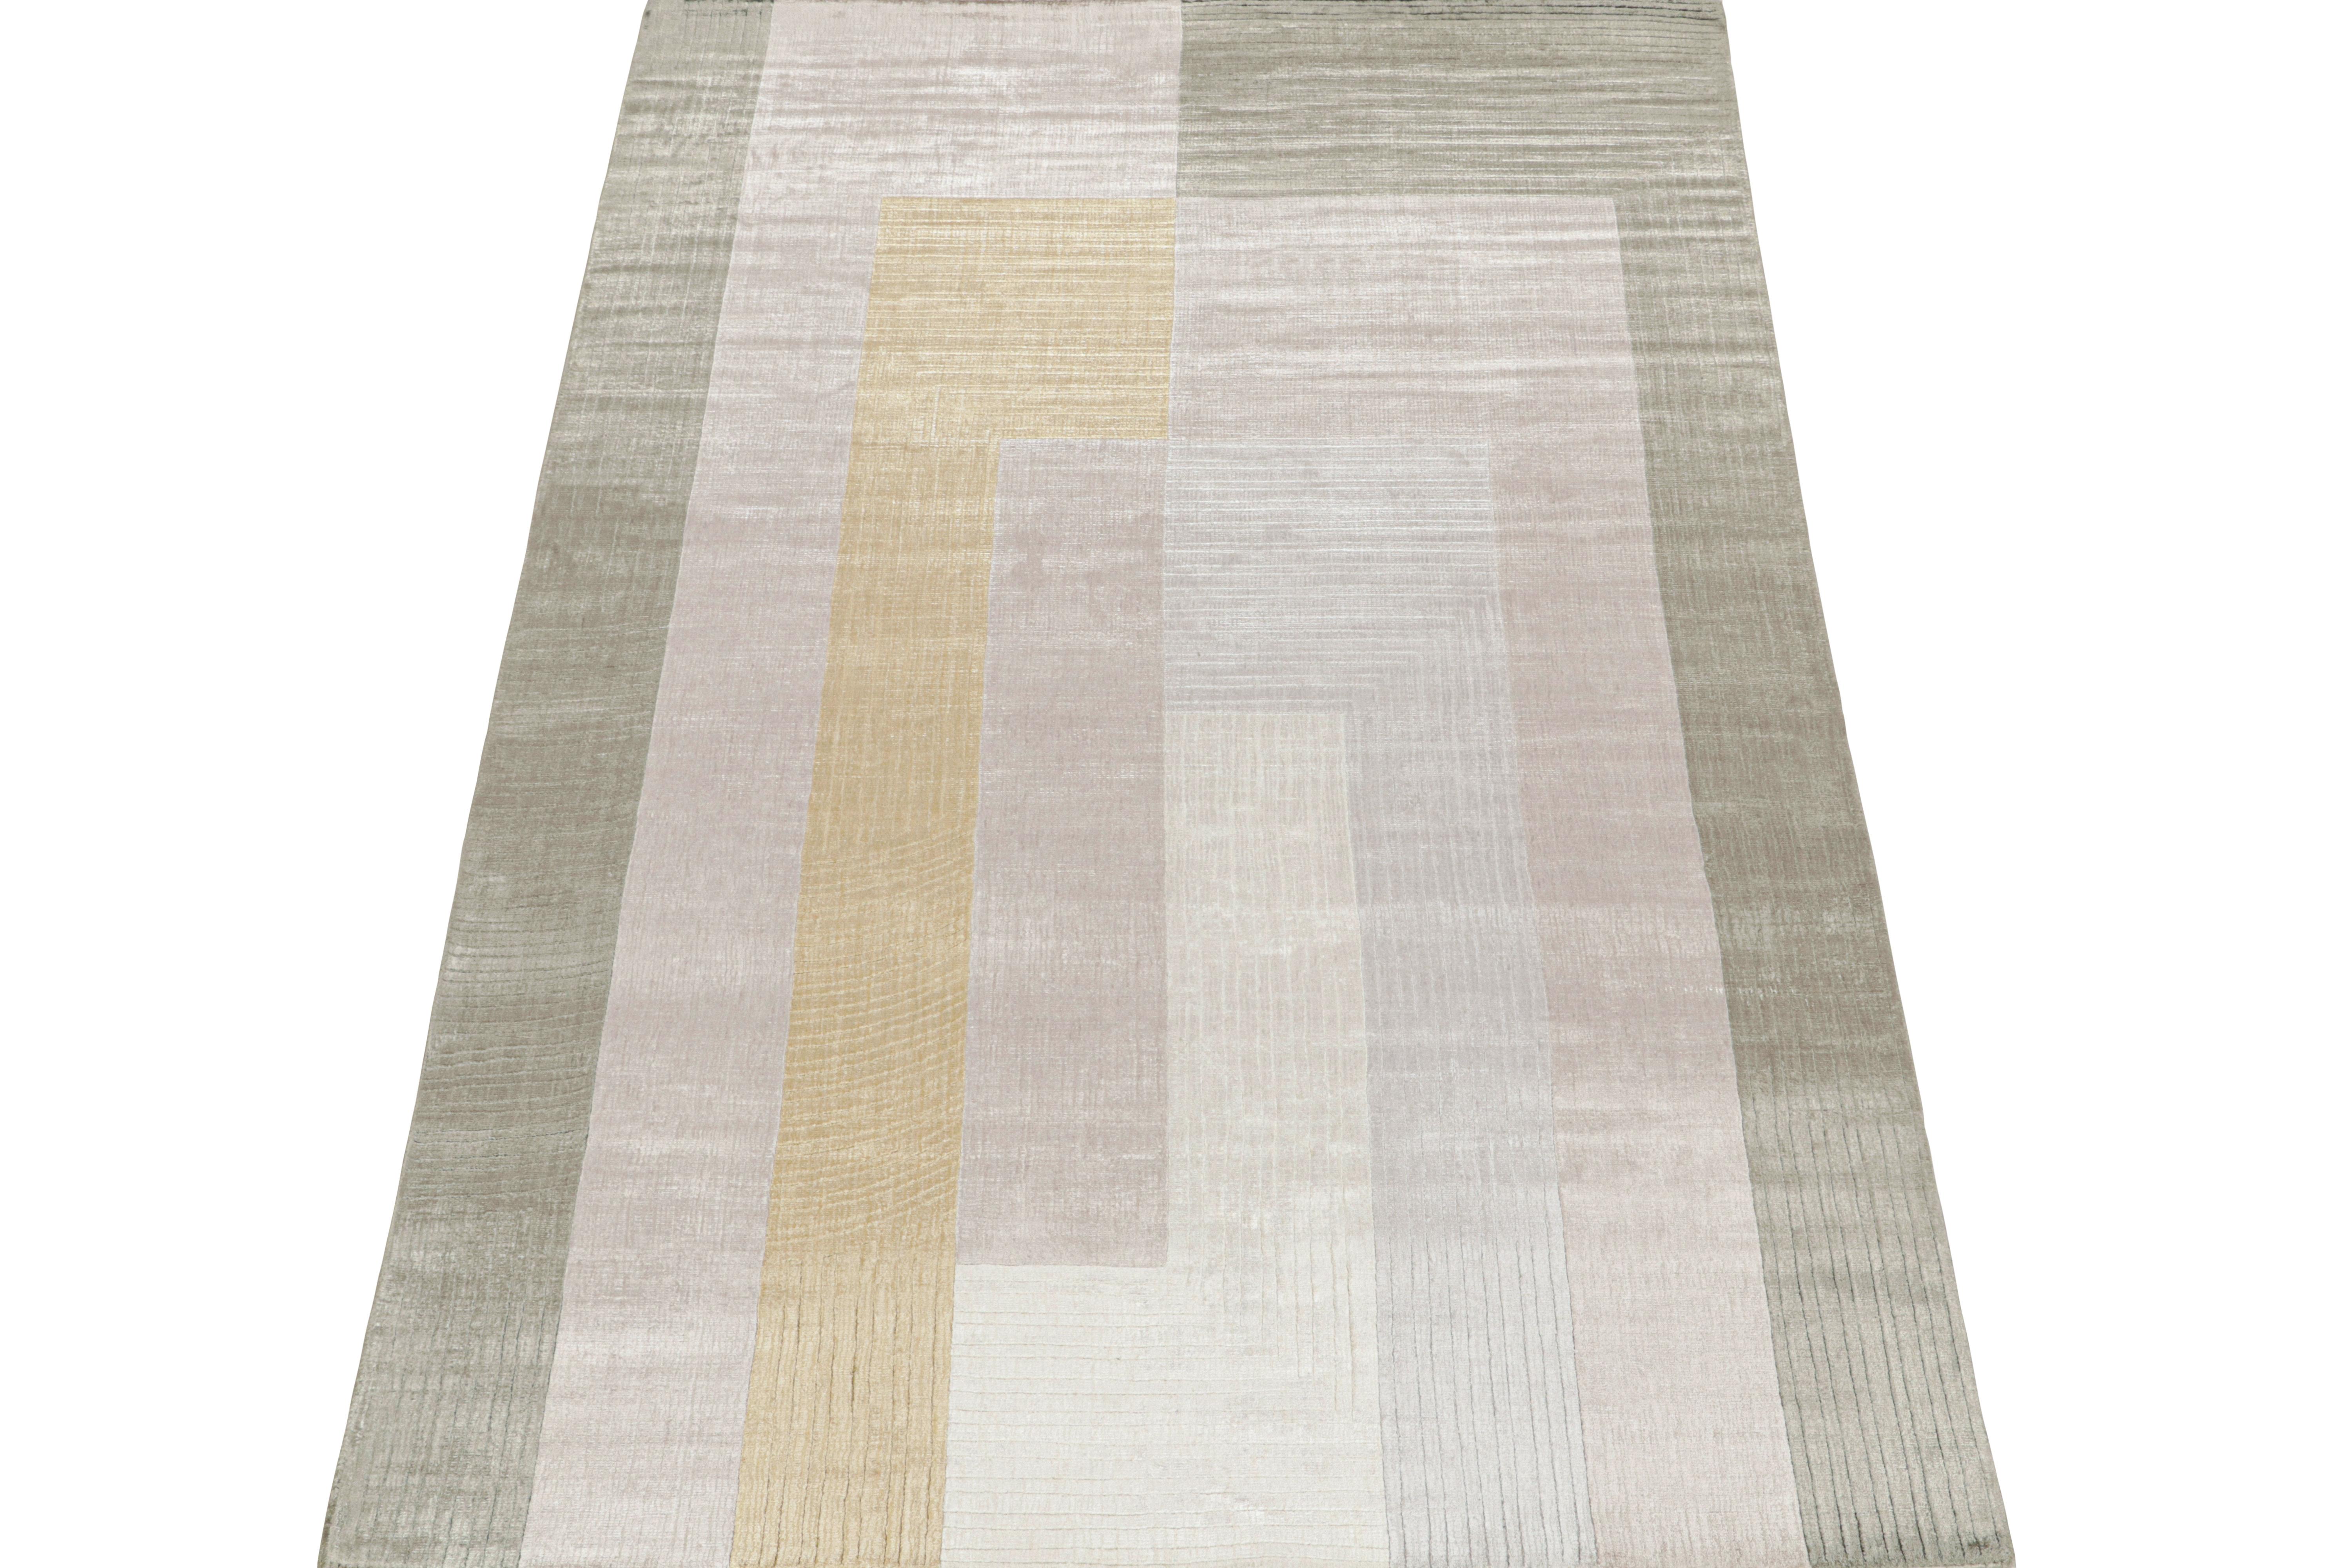 This 5x8 rug is a grand new entry to Rug & Kilim’s Modern Collection. Hand-knotted in art silk.

Connoisseurs will note this piece is from our new Light on Loom line, which includes quicker custom capabilities than ever before. This piece and